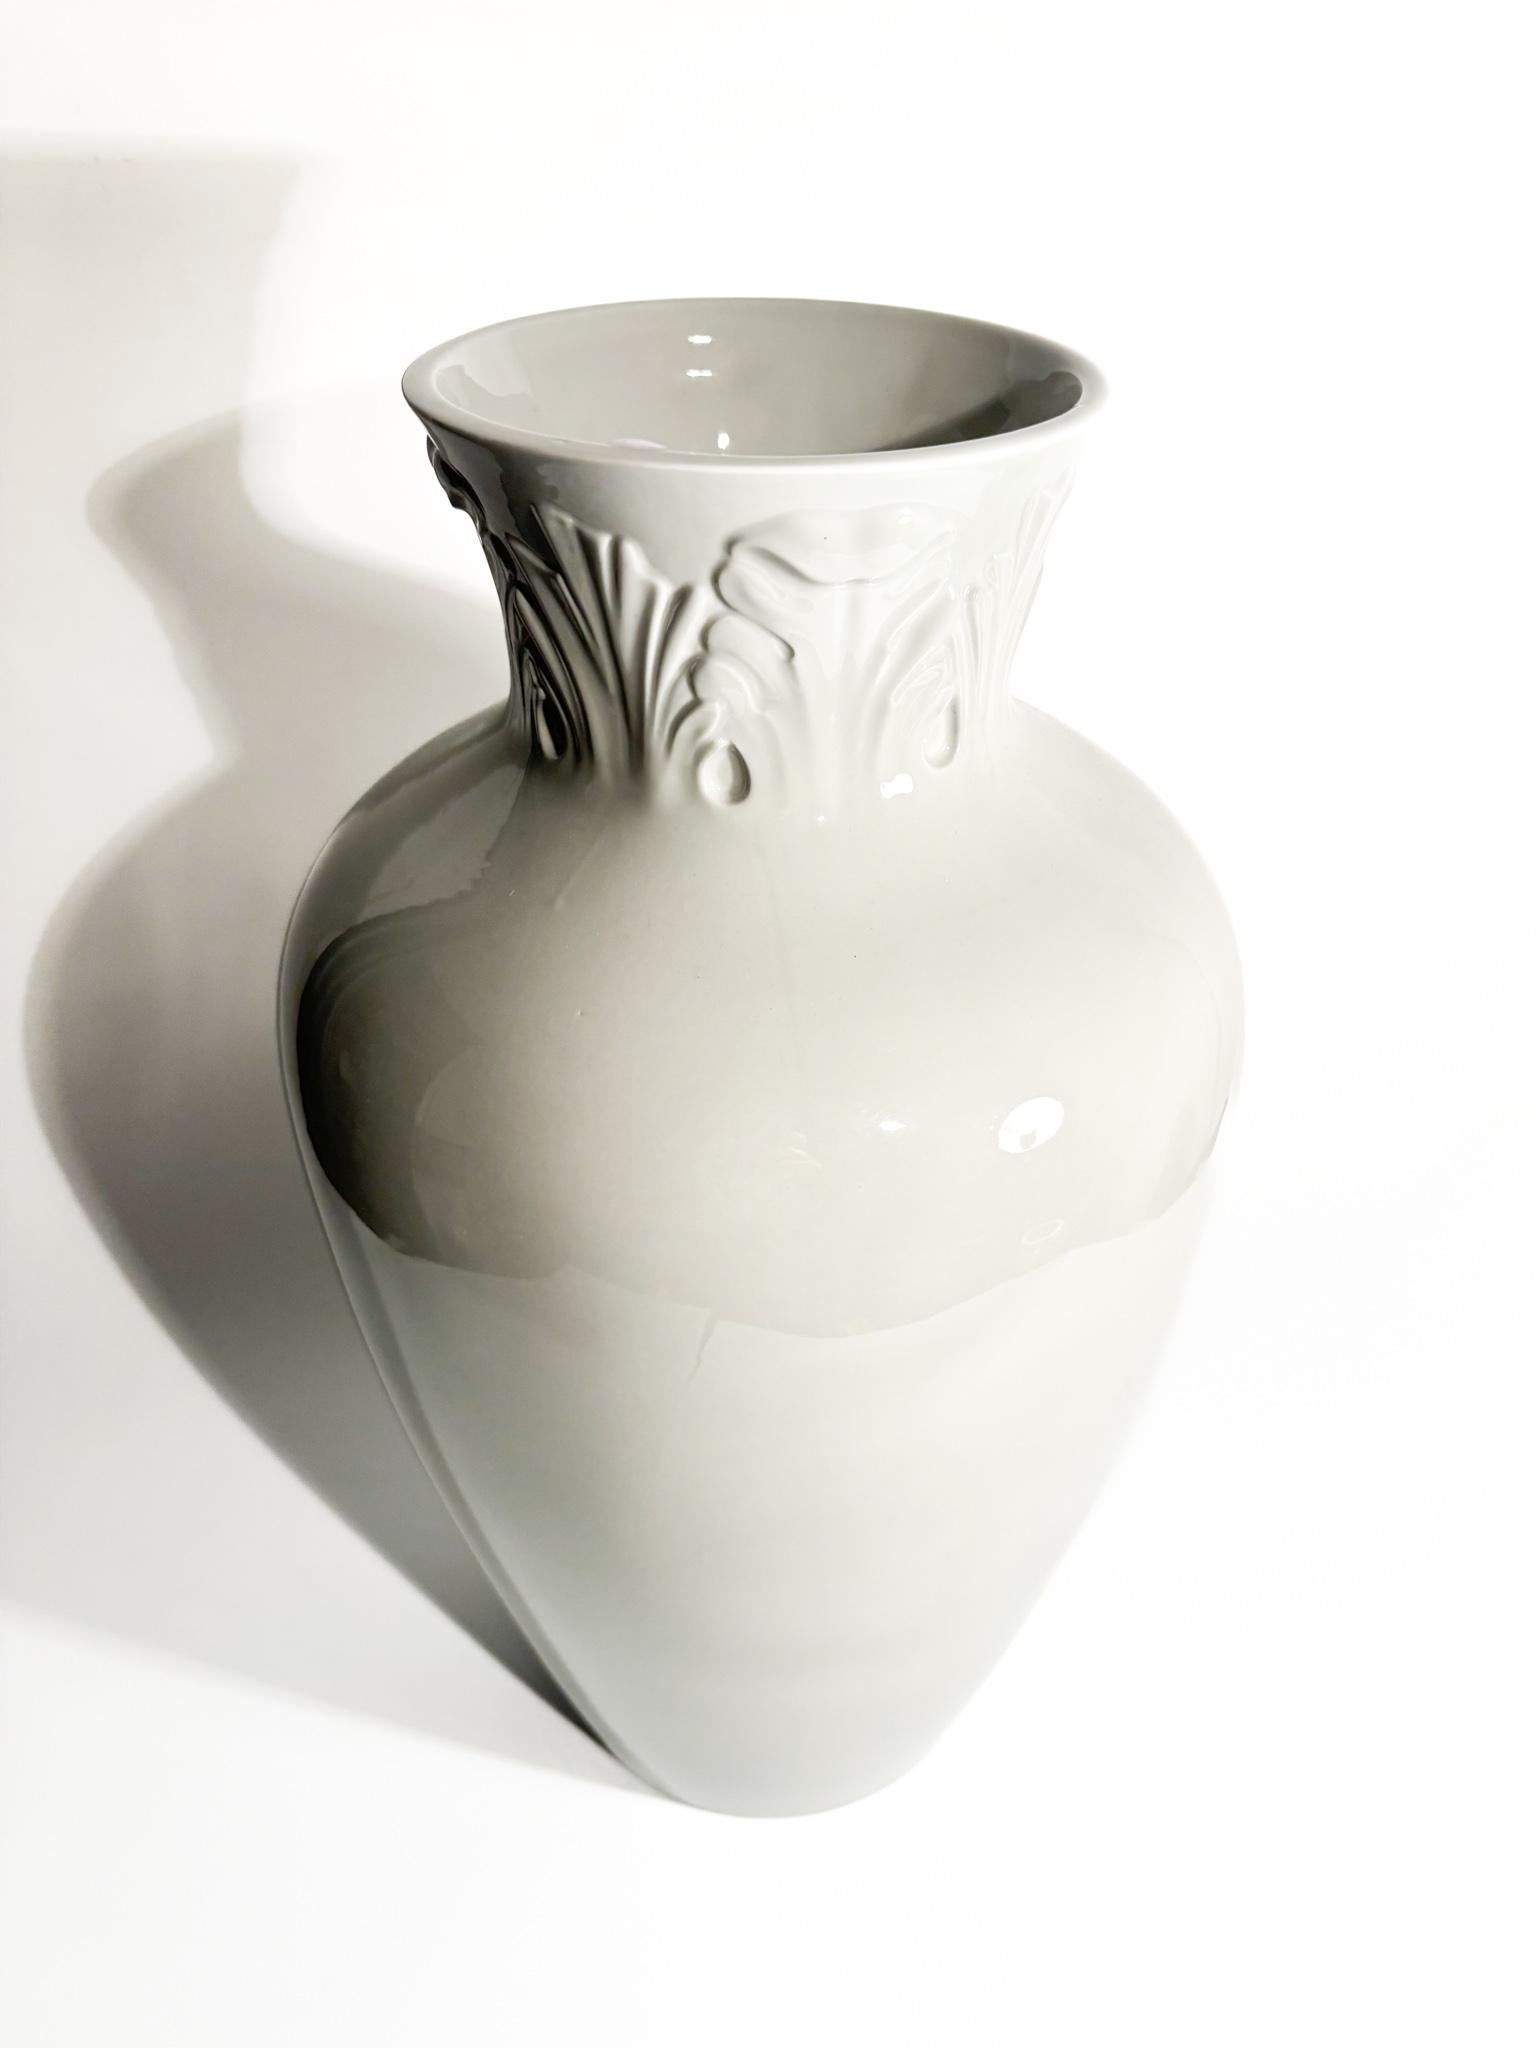 Porcelain Vase by Richard Ginori Gray 'Manifattura 1946' from the 1990s In Good Condition For Sale In Milano, MI